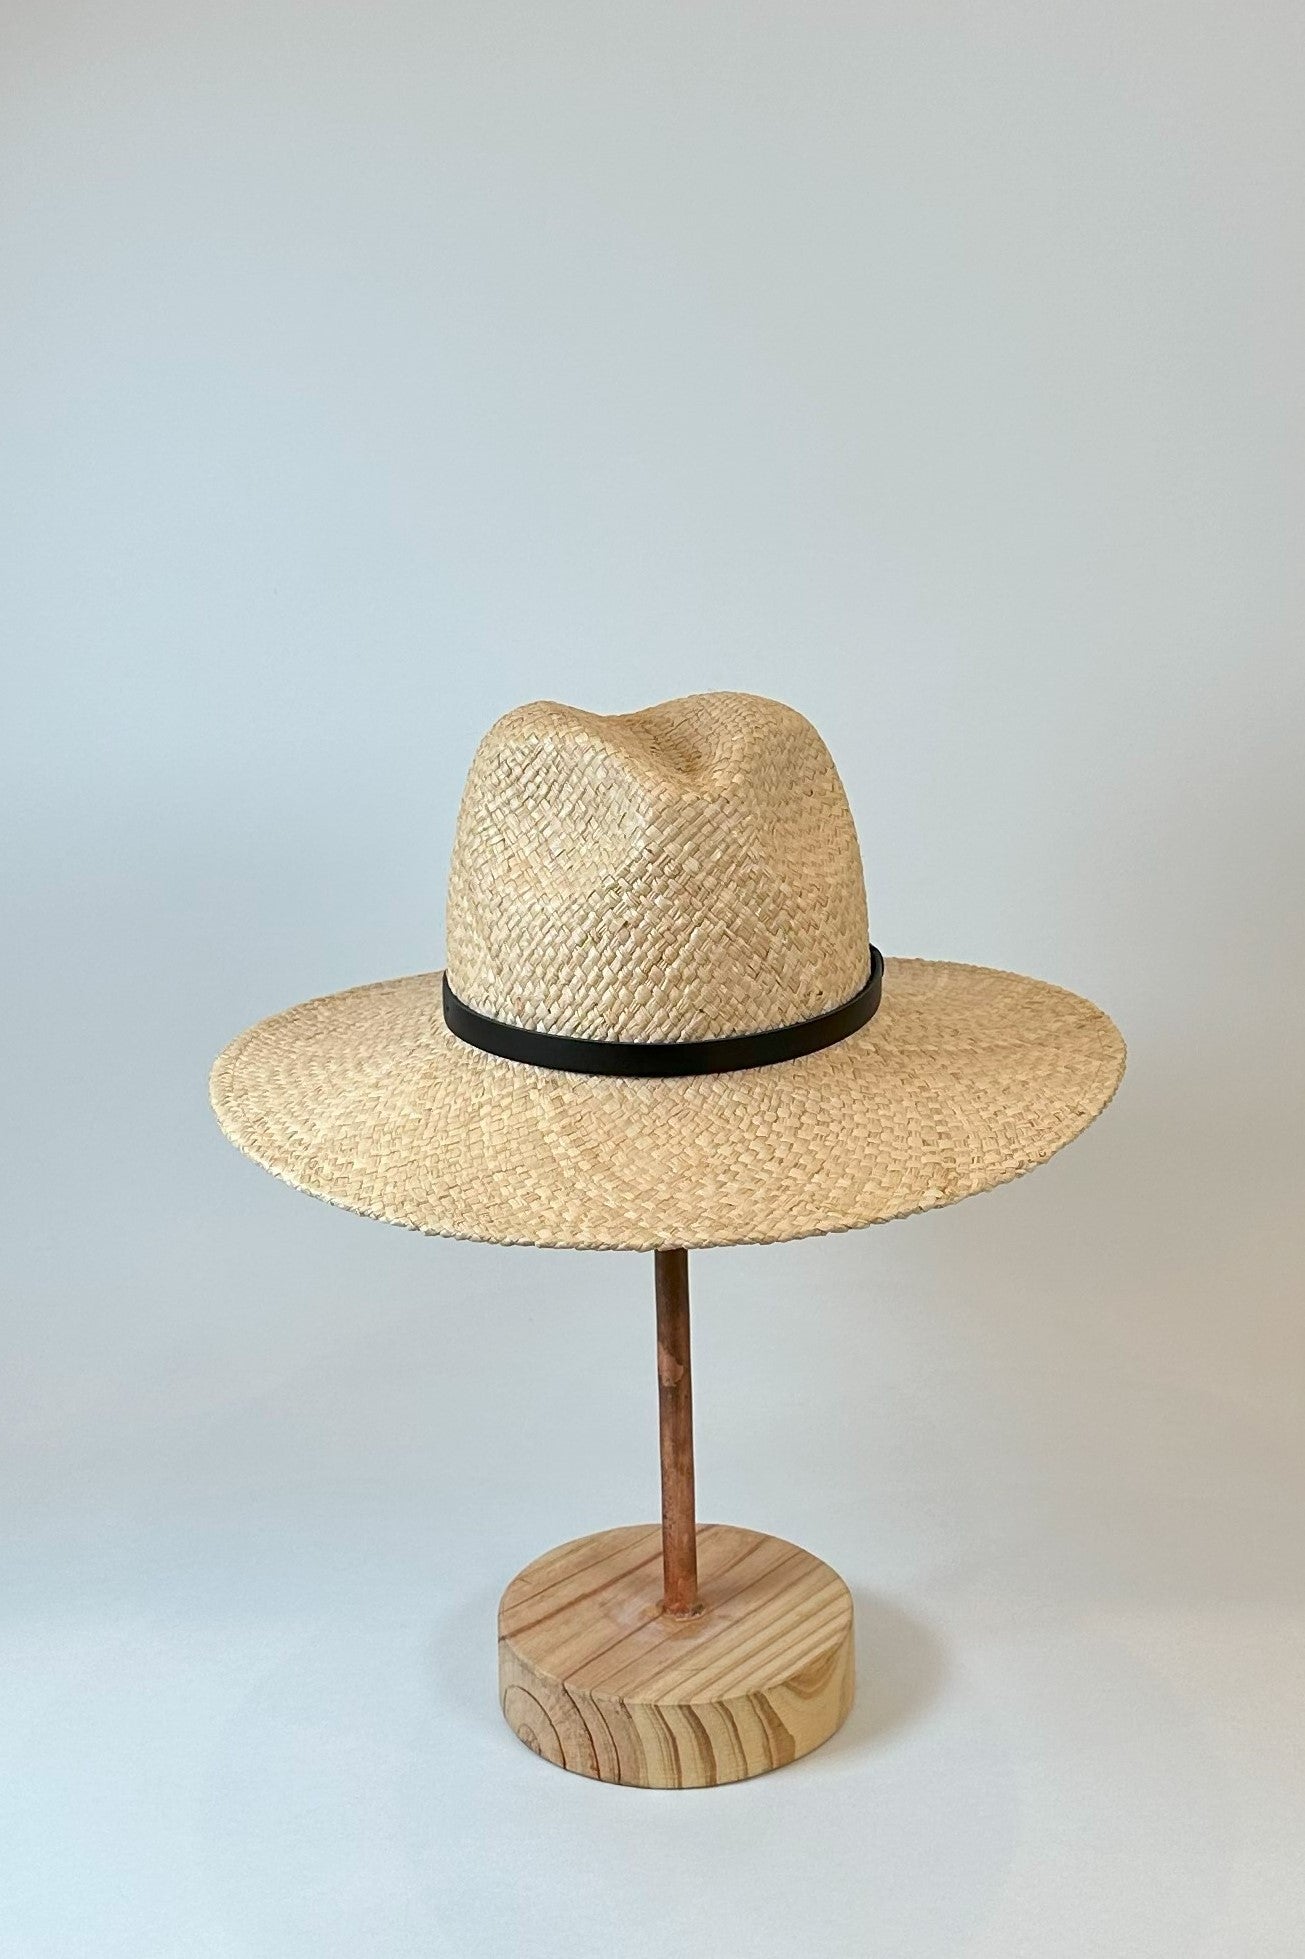 Straw panama hat with a black leather band